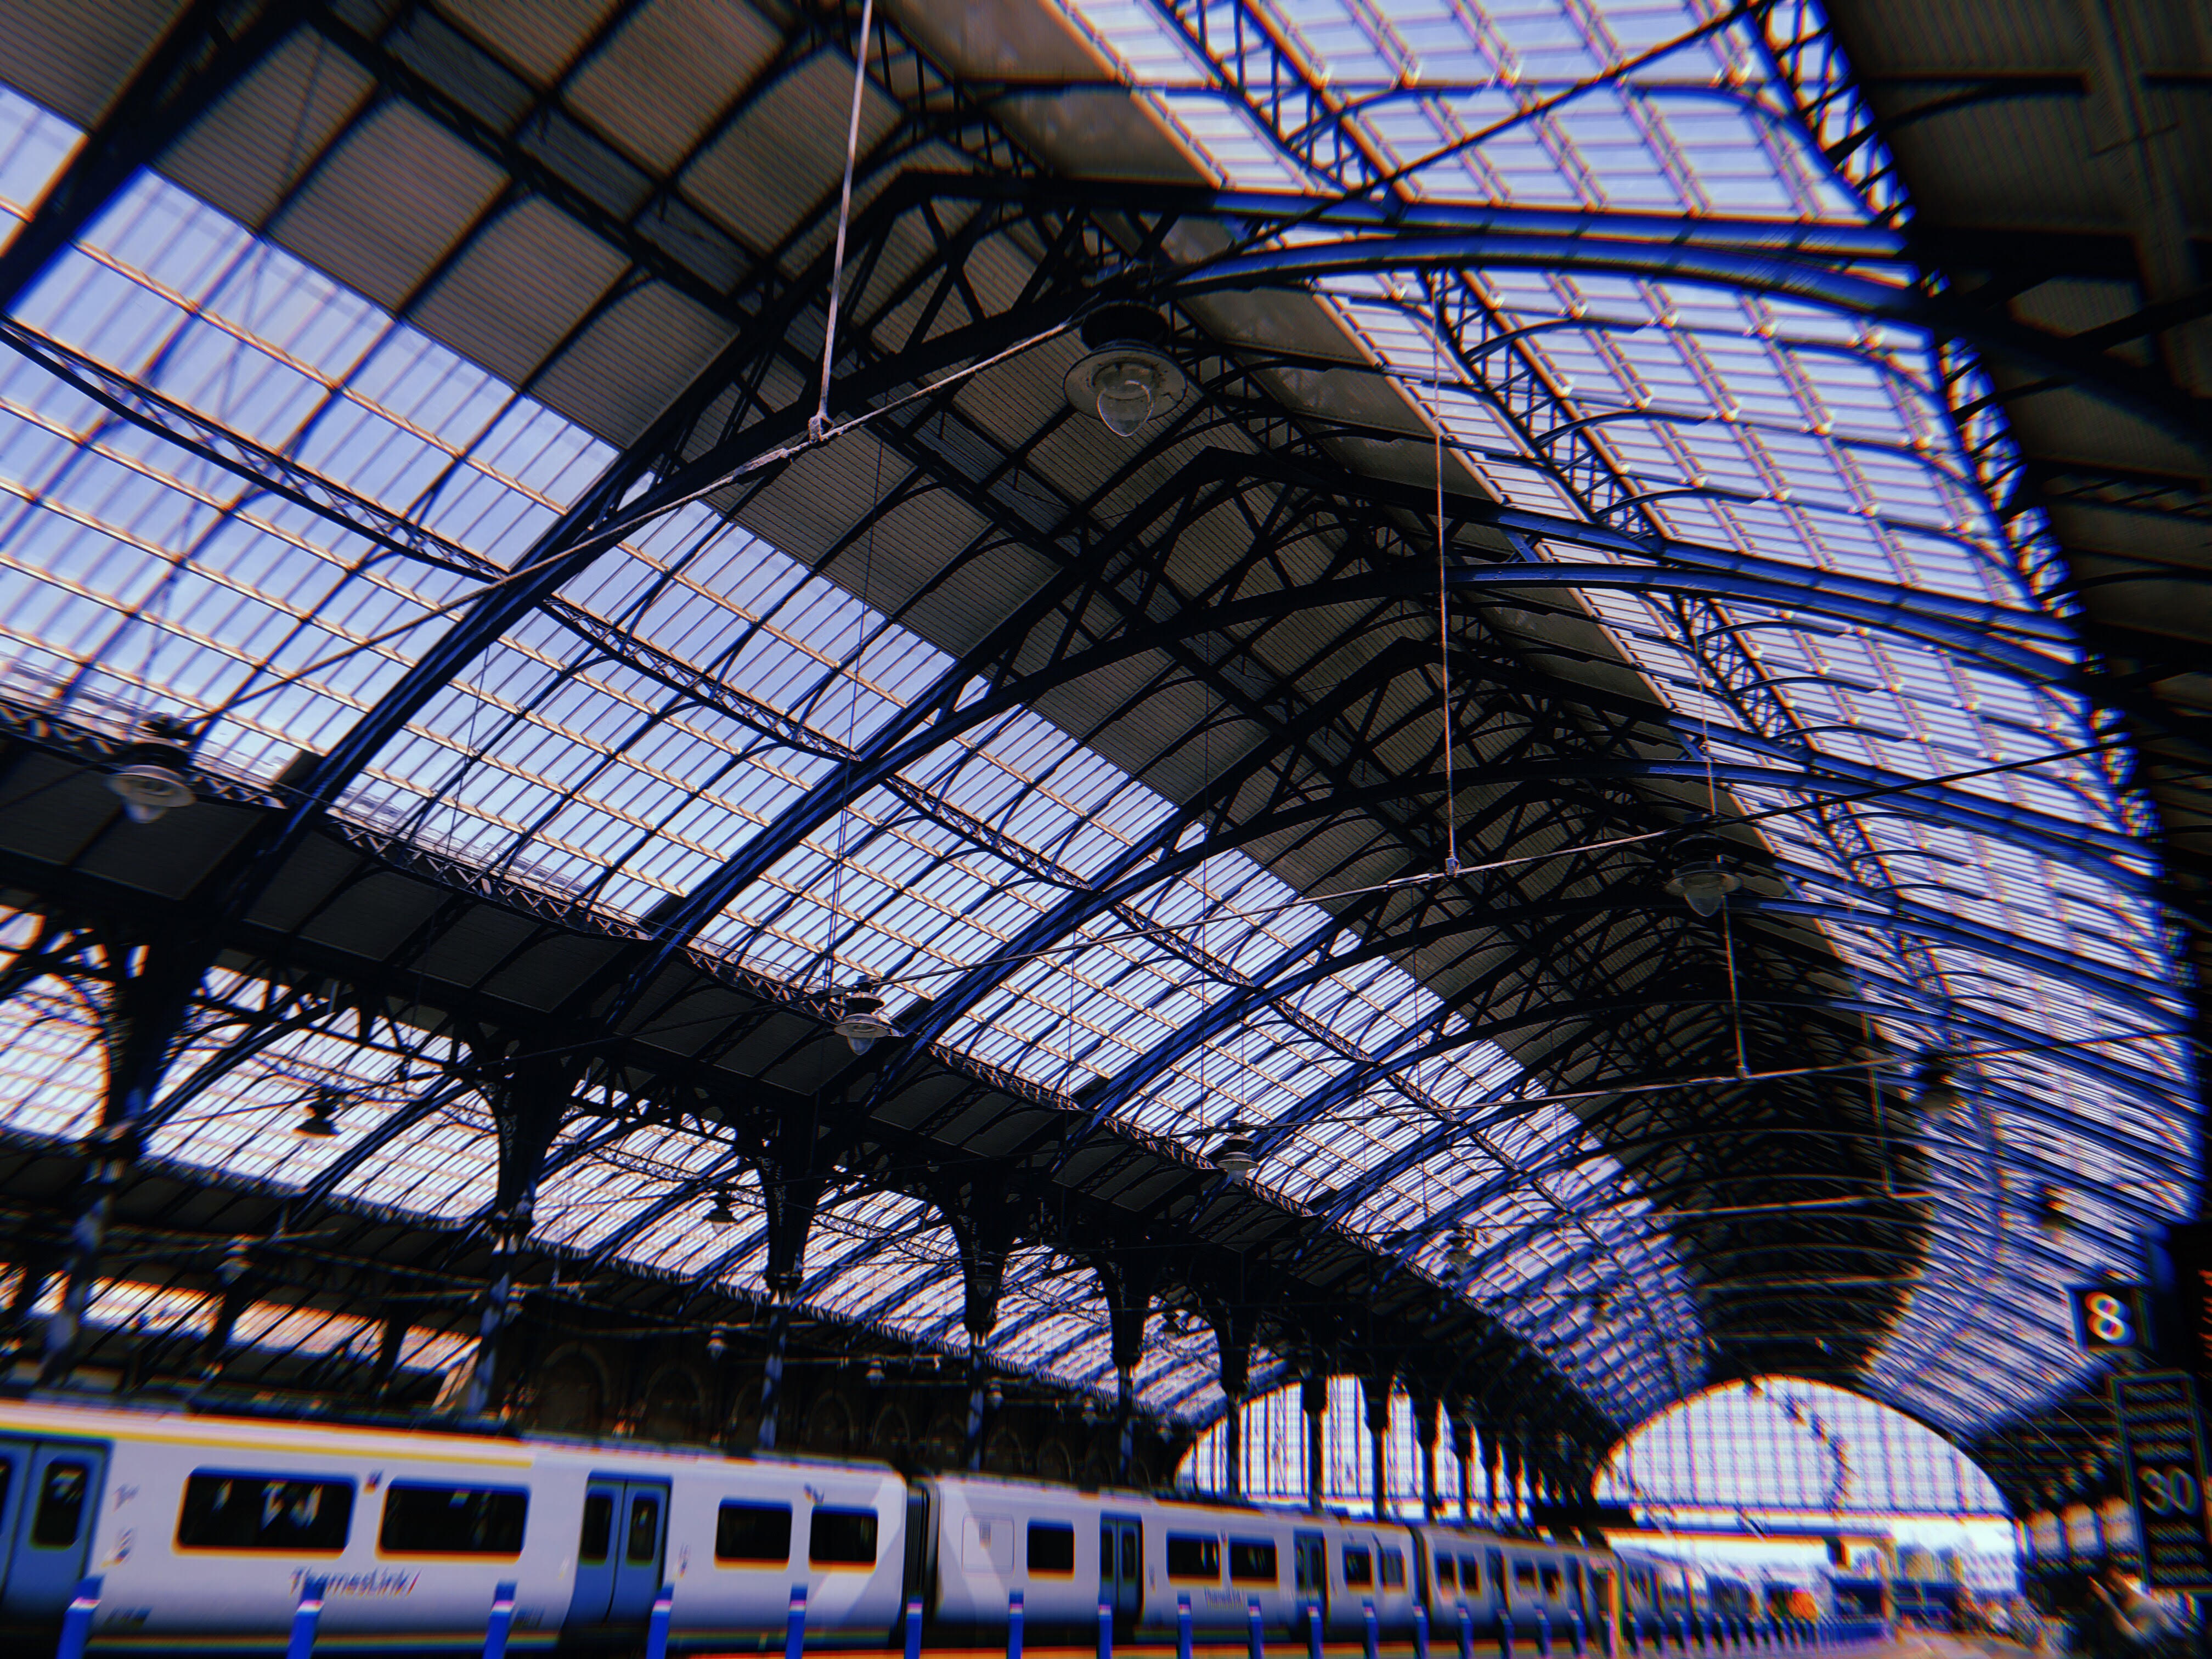 A photo of Brighton Railway Station with bright glass ceilings and a line of train cars.